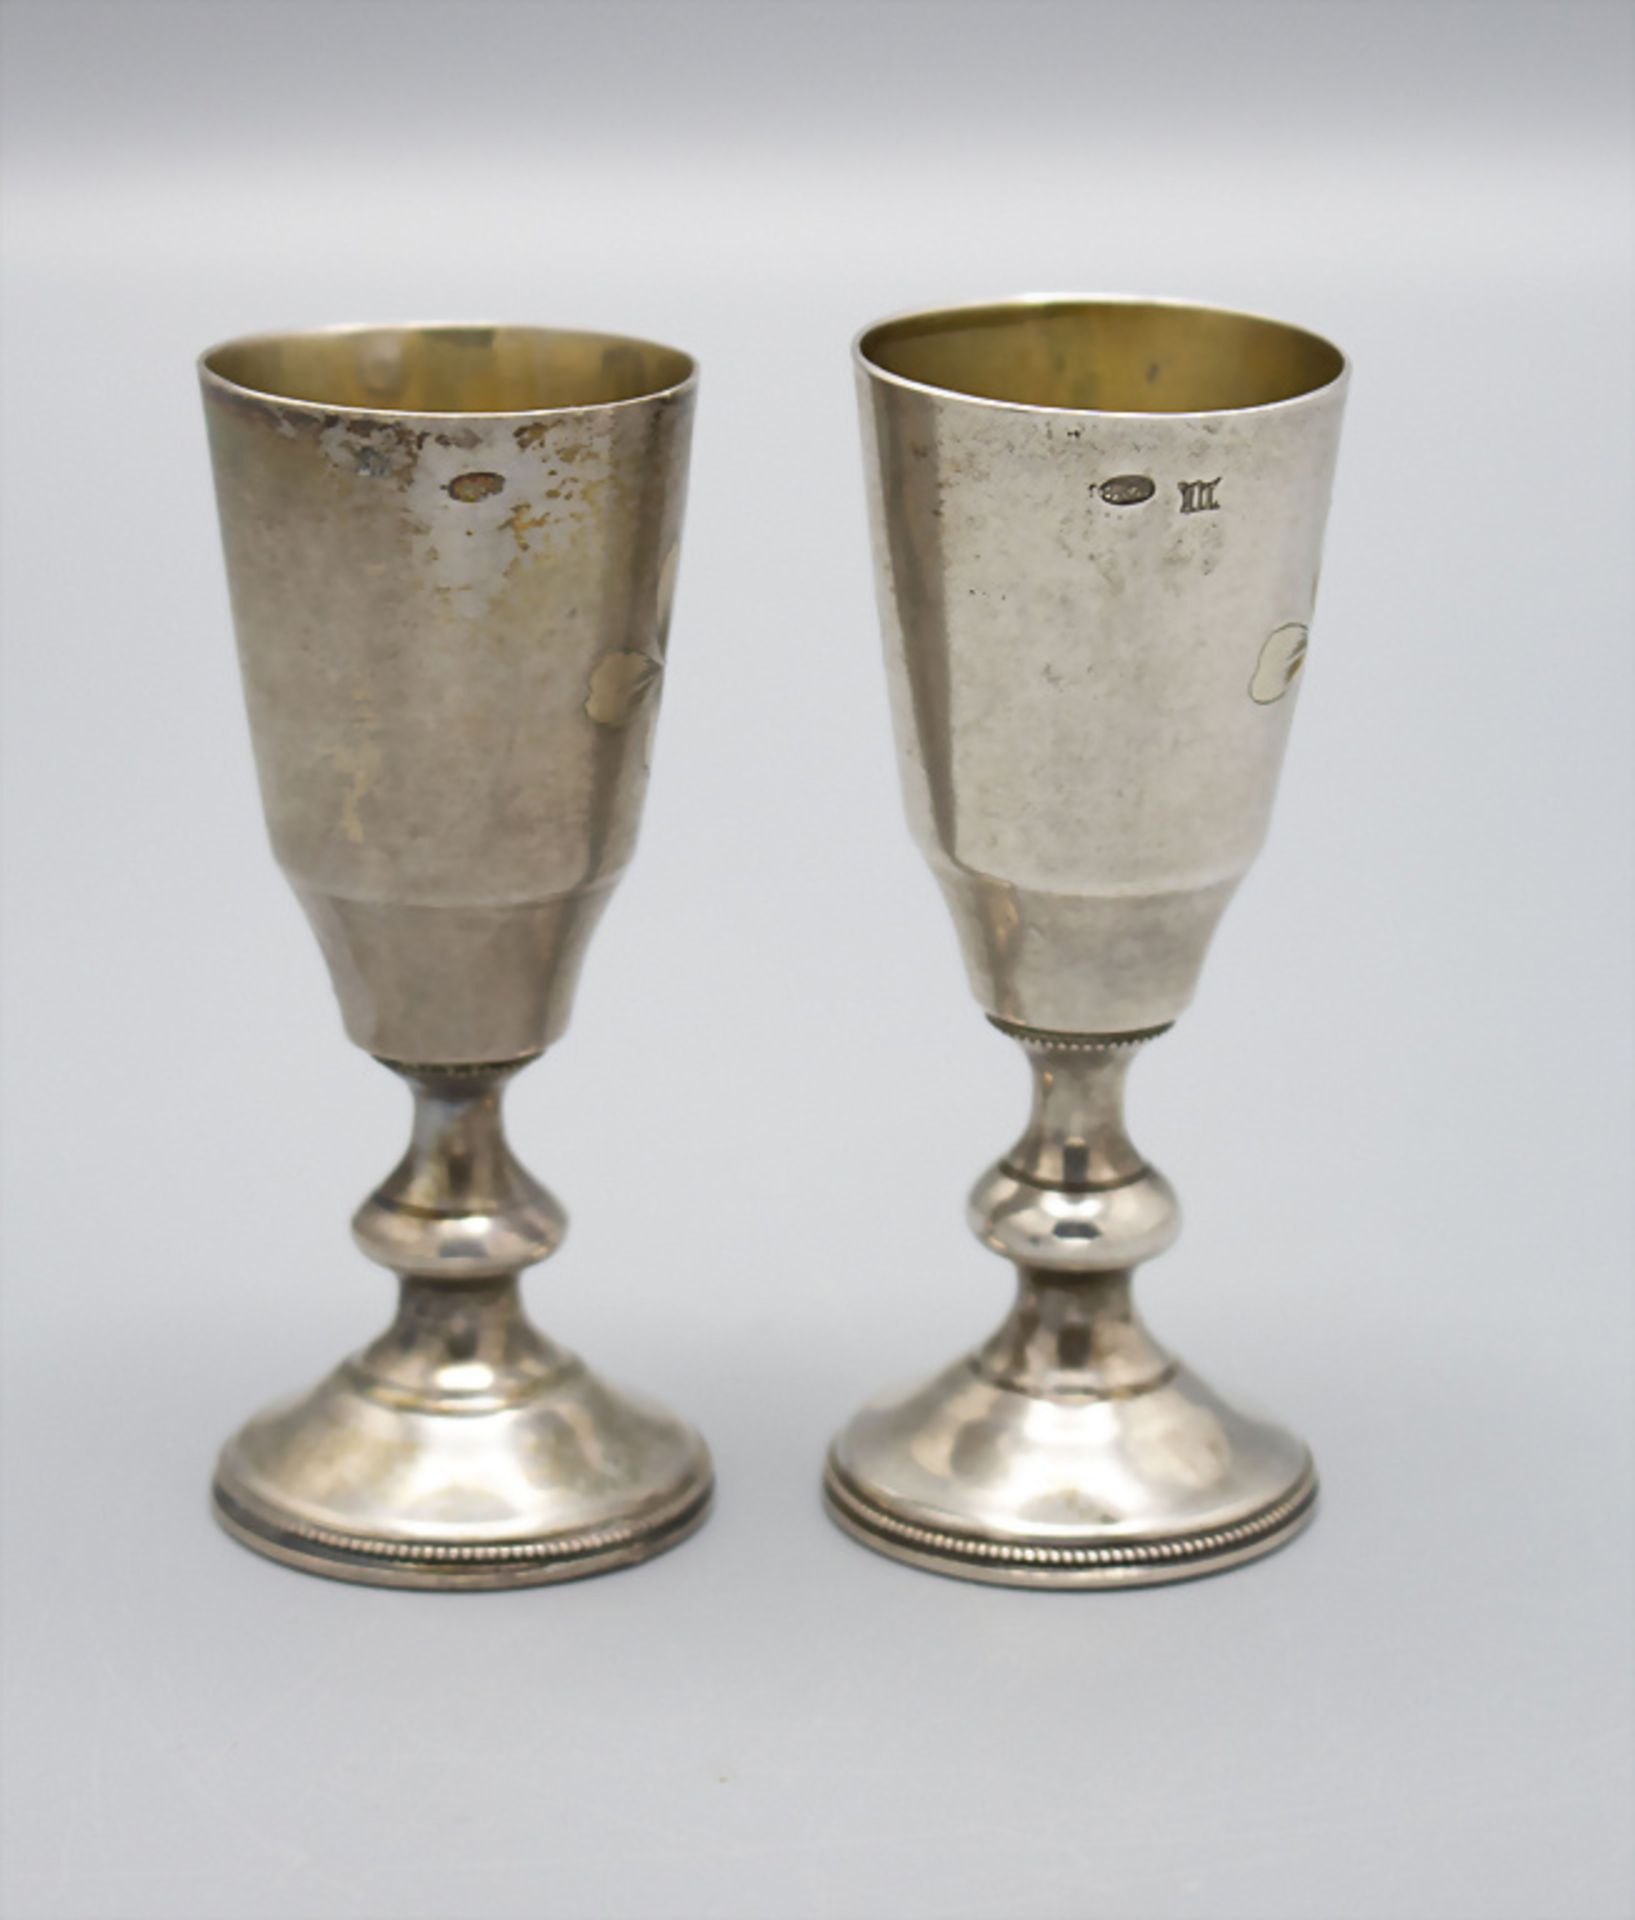 2 Vodka Becher / Two silver Vodka cups, Moskau/Moscow, 1896-1908 - Image 3 of 9